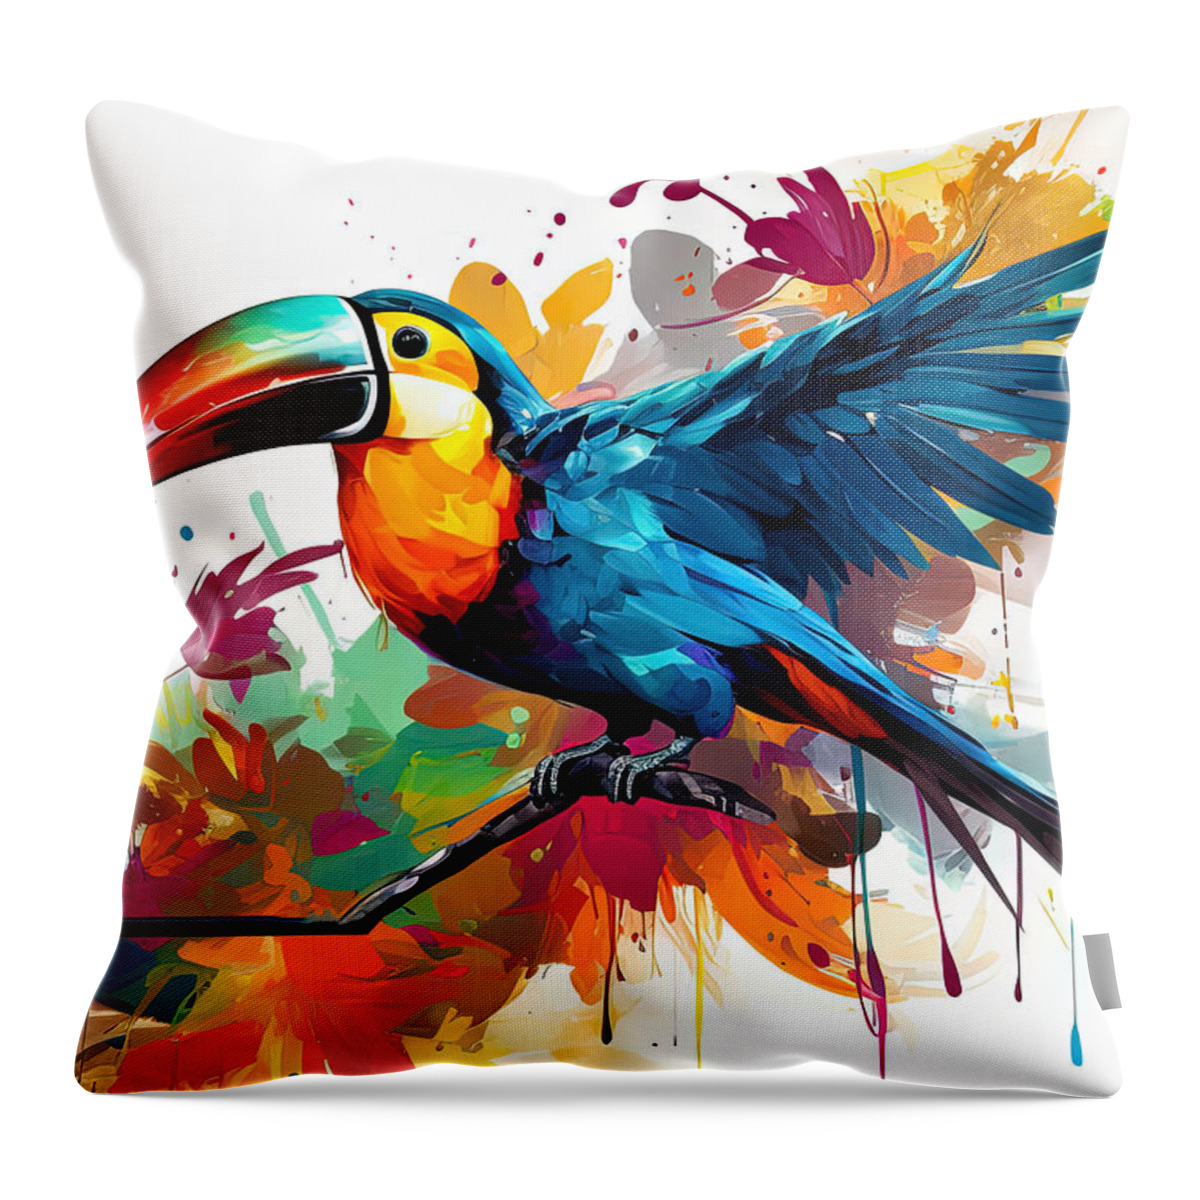 Toucan Art Throw Pillow featuring the painting Toucan Paintings by Lourry Legarde